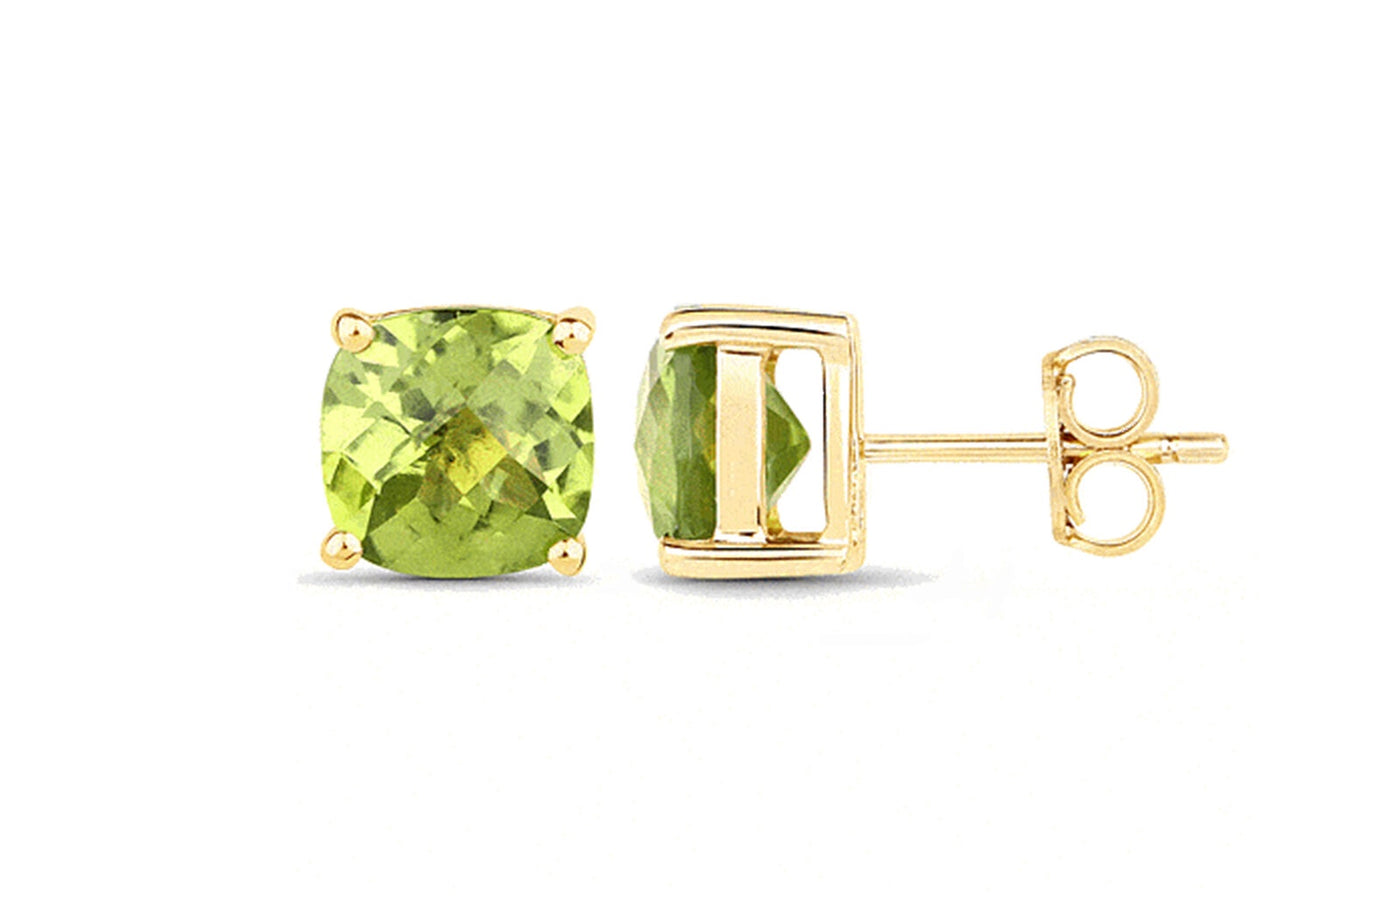 Chequerboard Peridot Stud Earrings in Yellow Gold | 4.48ctw